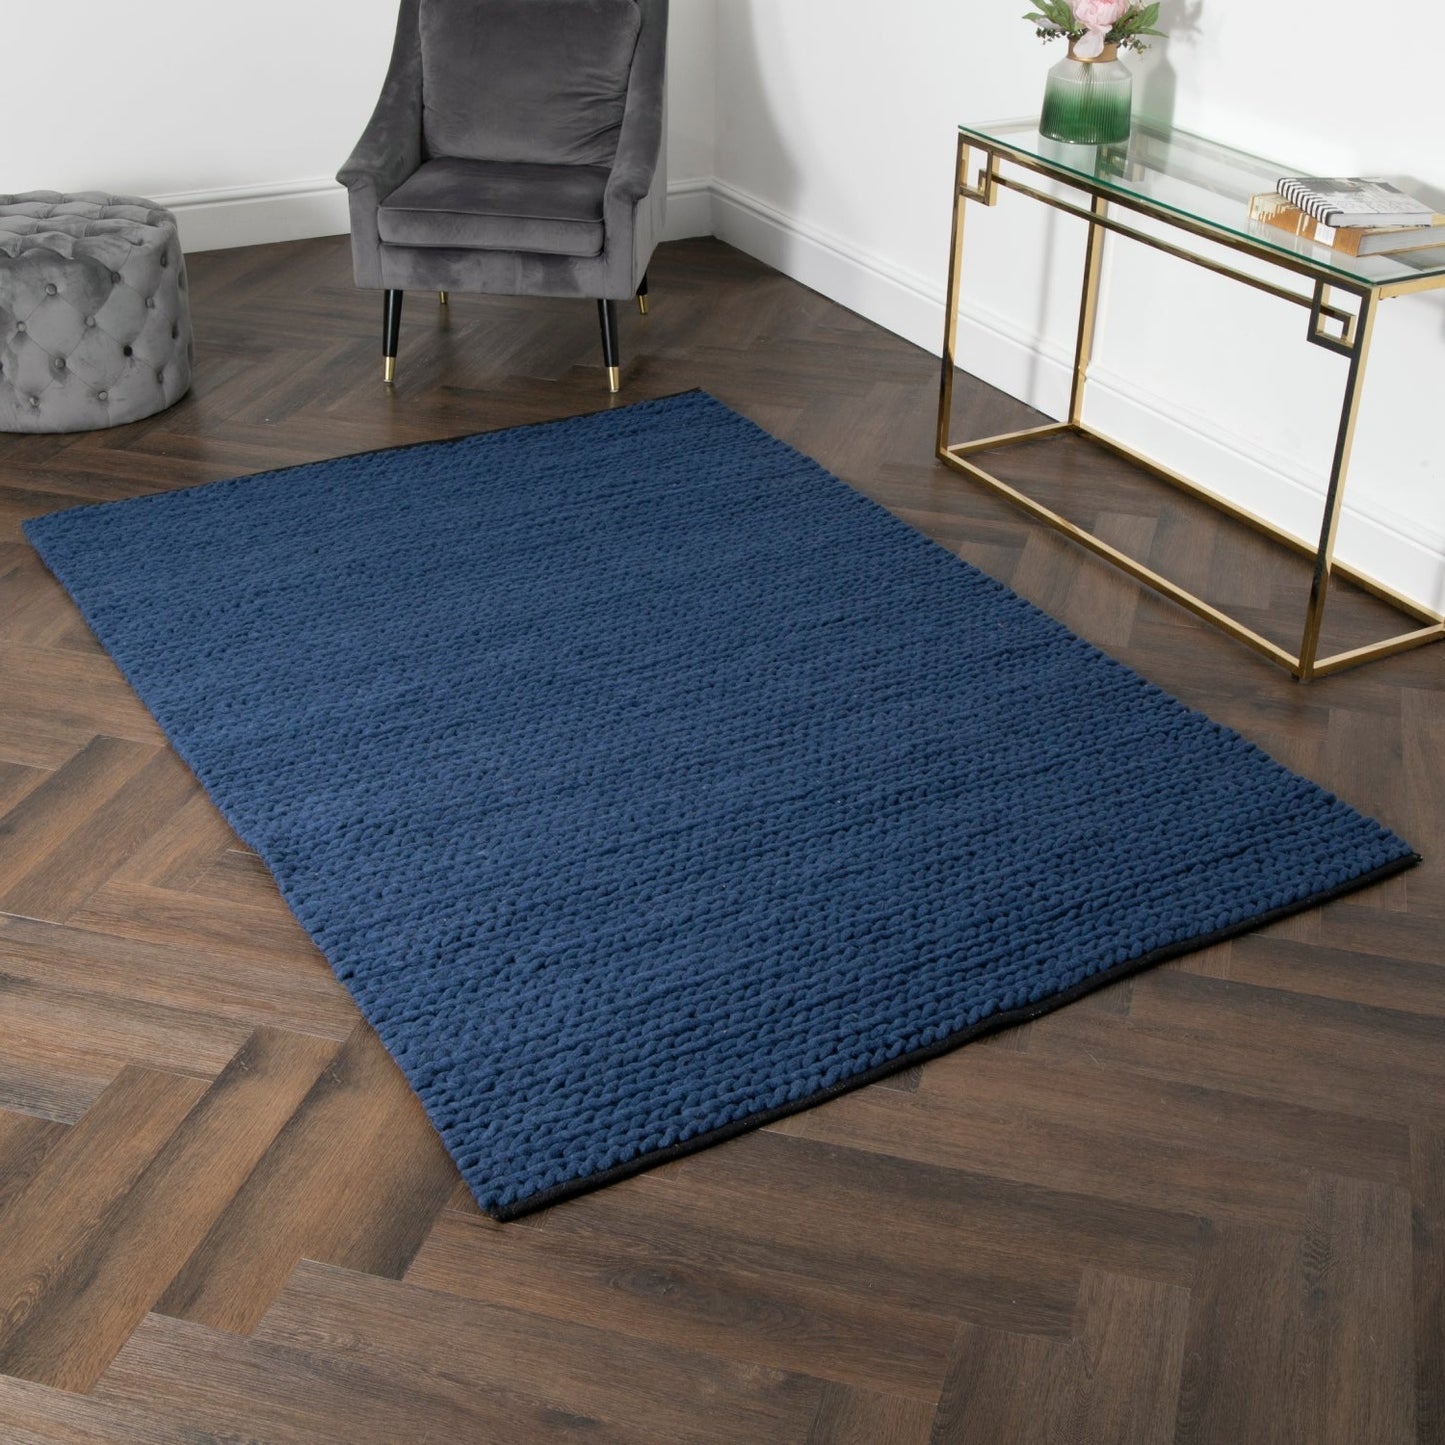 Navy knitted wool rug by Native